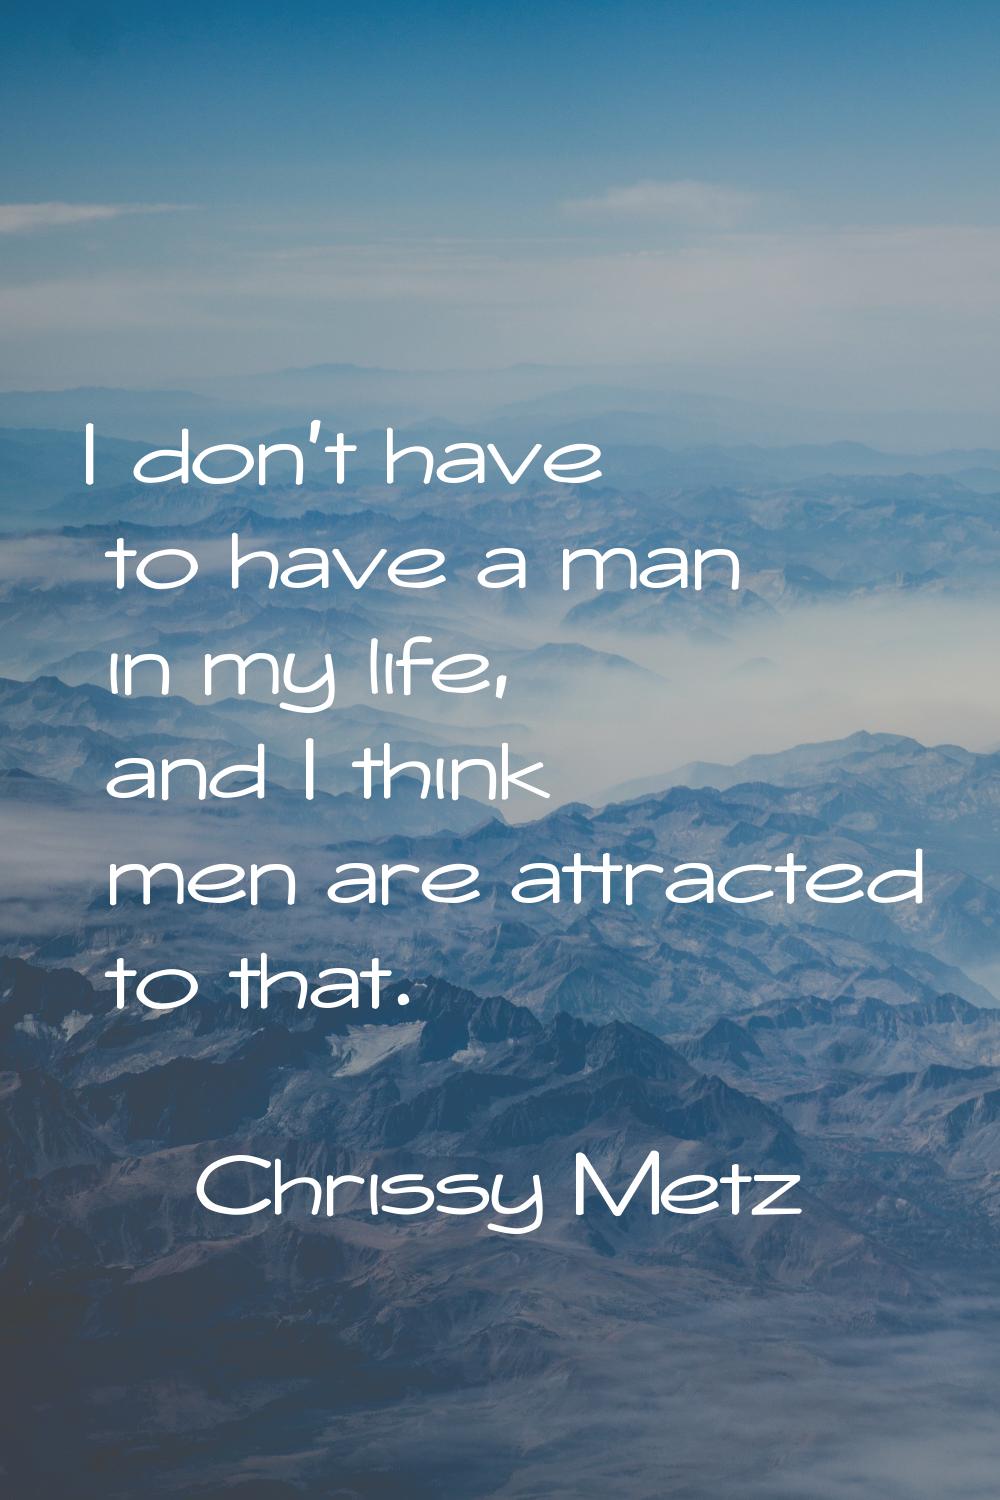 I don't have to have a man in my life, and I think men are attracted to that.